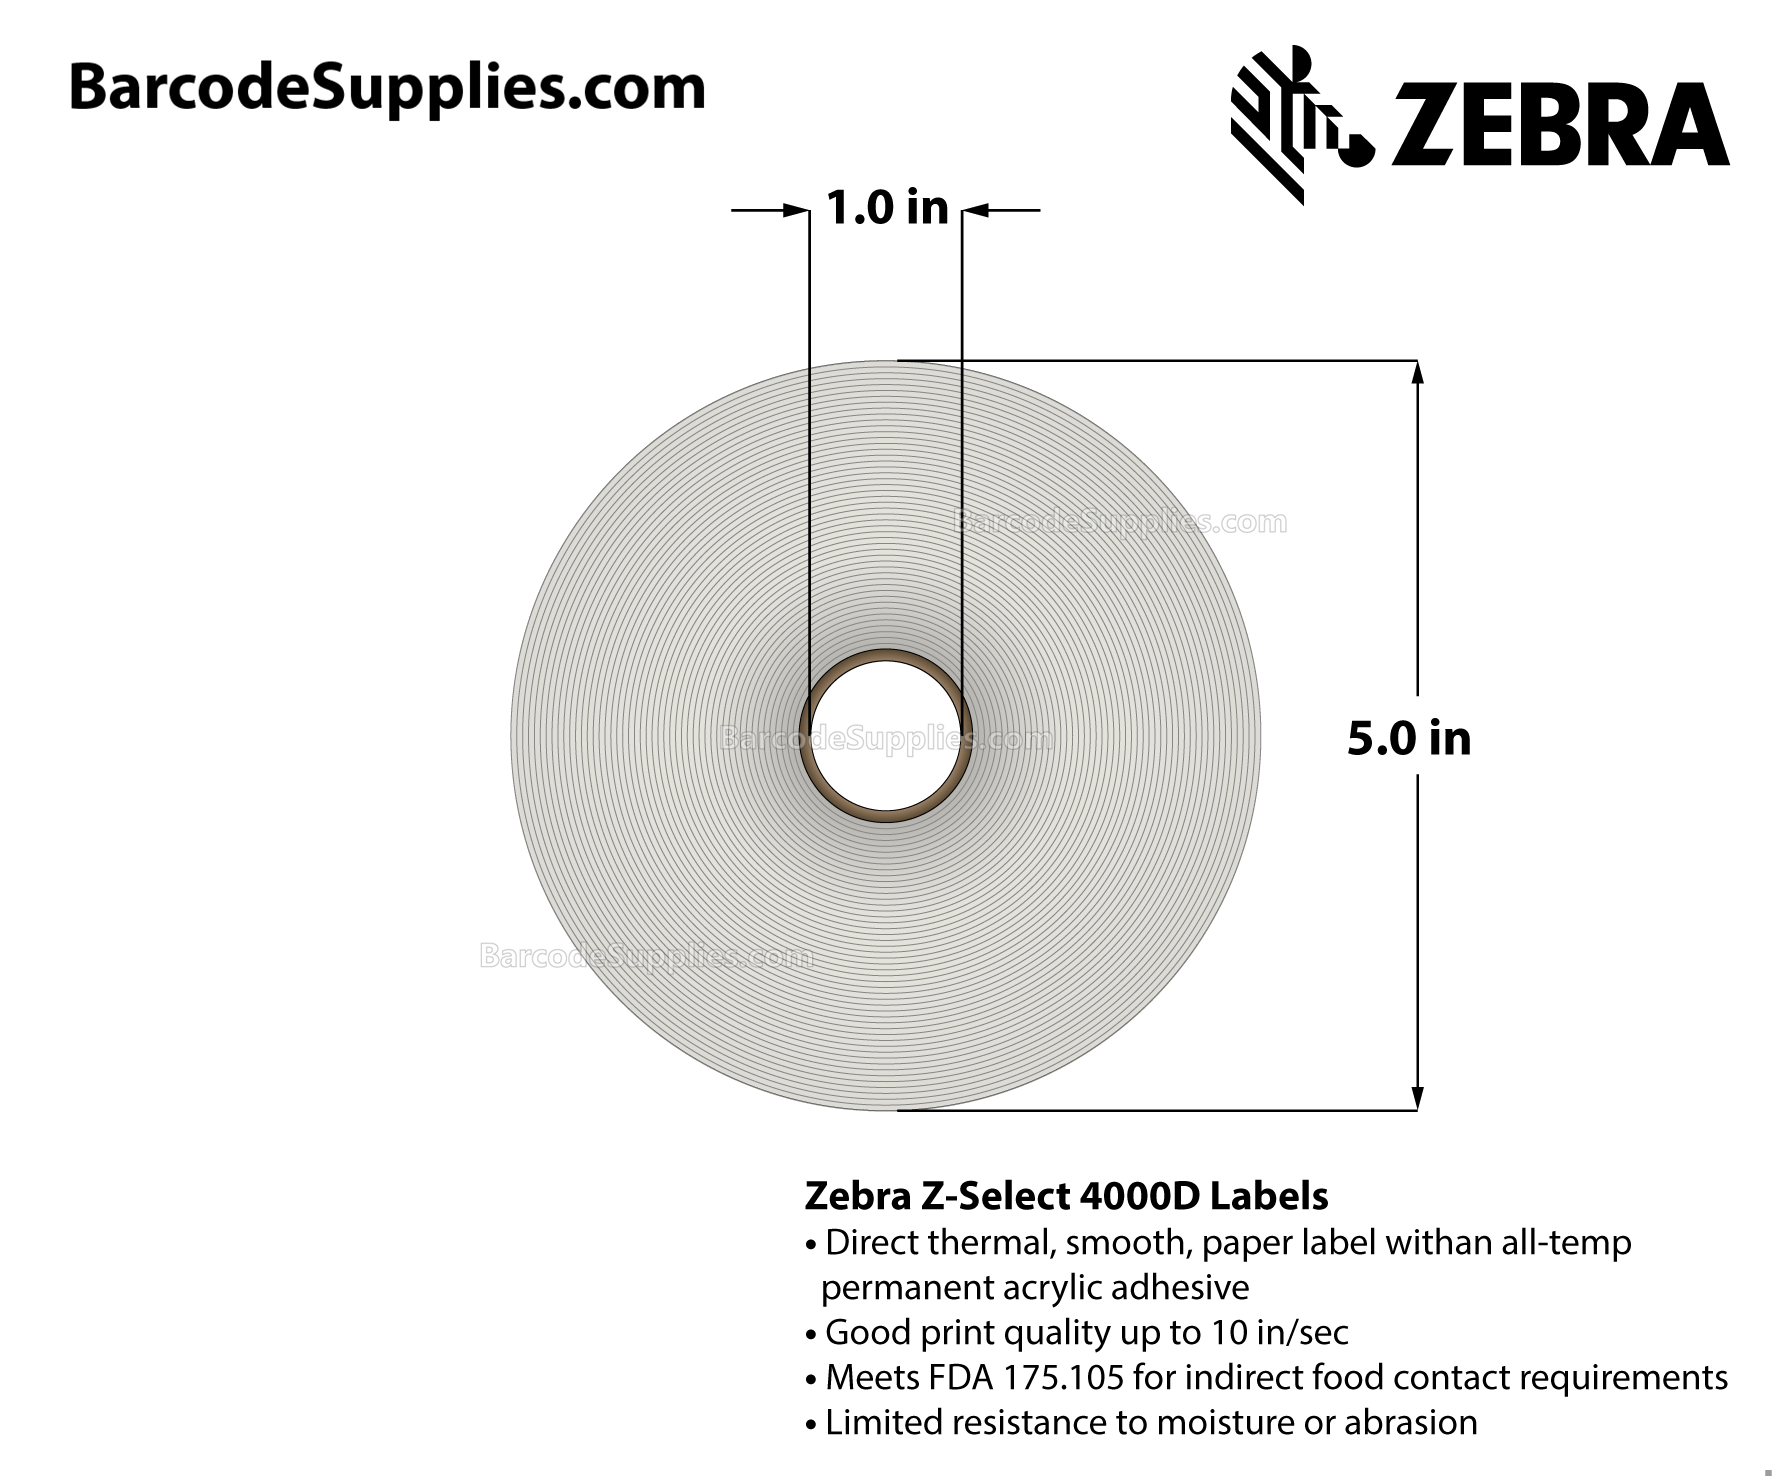 4 x 3 Direct Thermal White Z-Select 4000D Labels With All-Temp Adhesive - Perforated - 930 Labels Per Roll - Carton Of 12 Rolls - 11160 Labels Total - MPN: 10015344